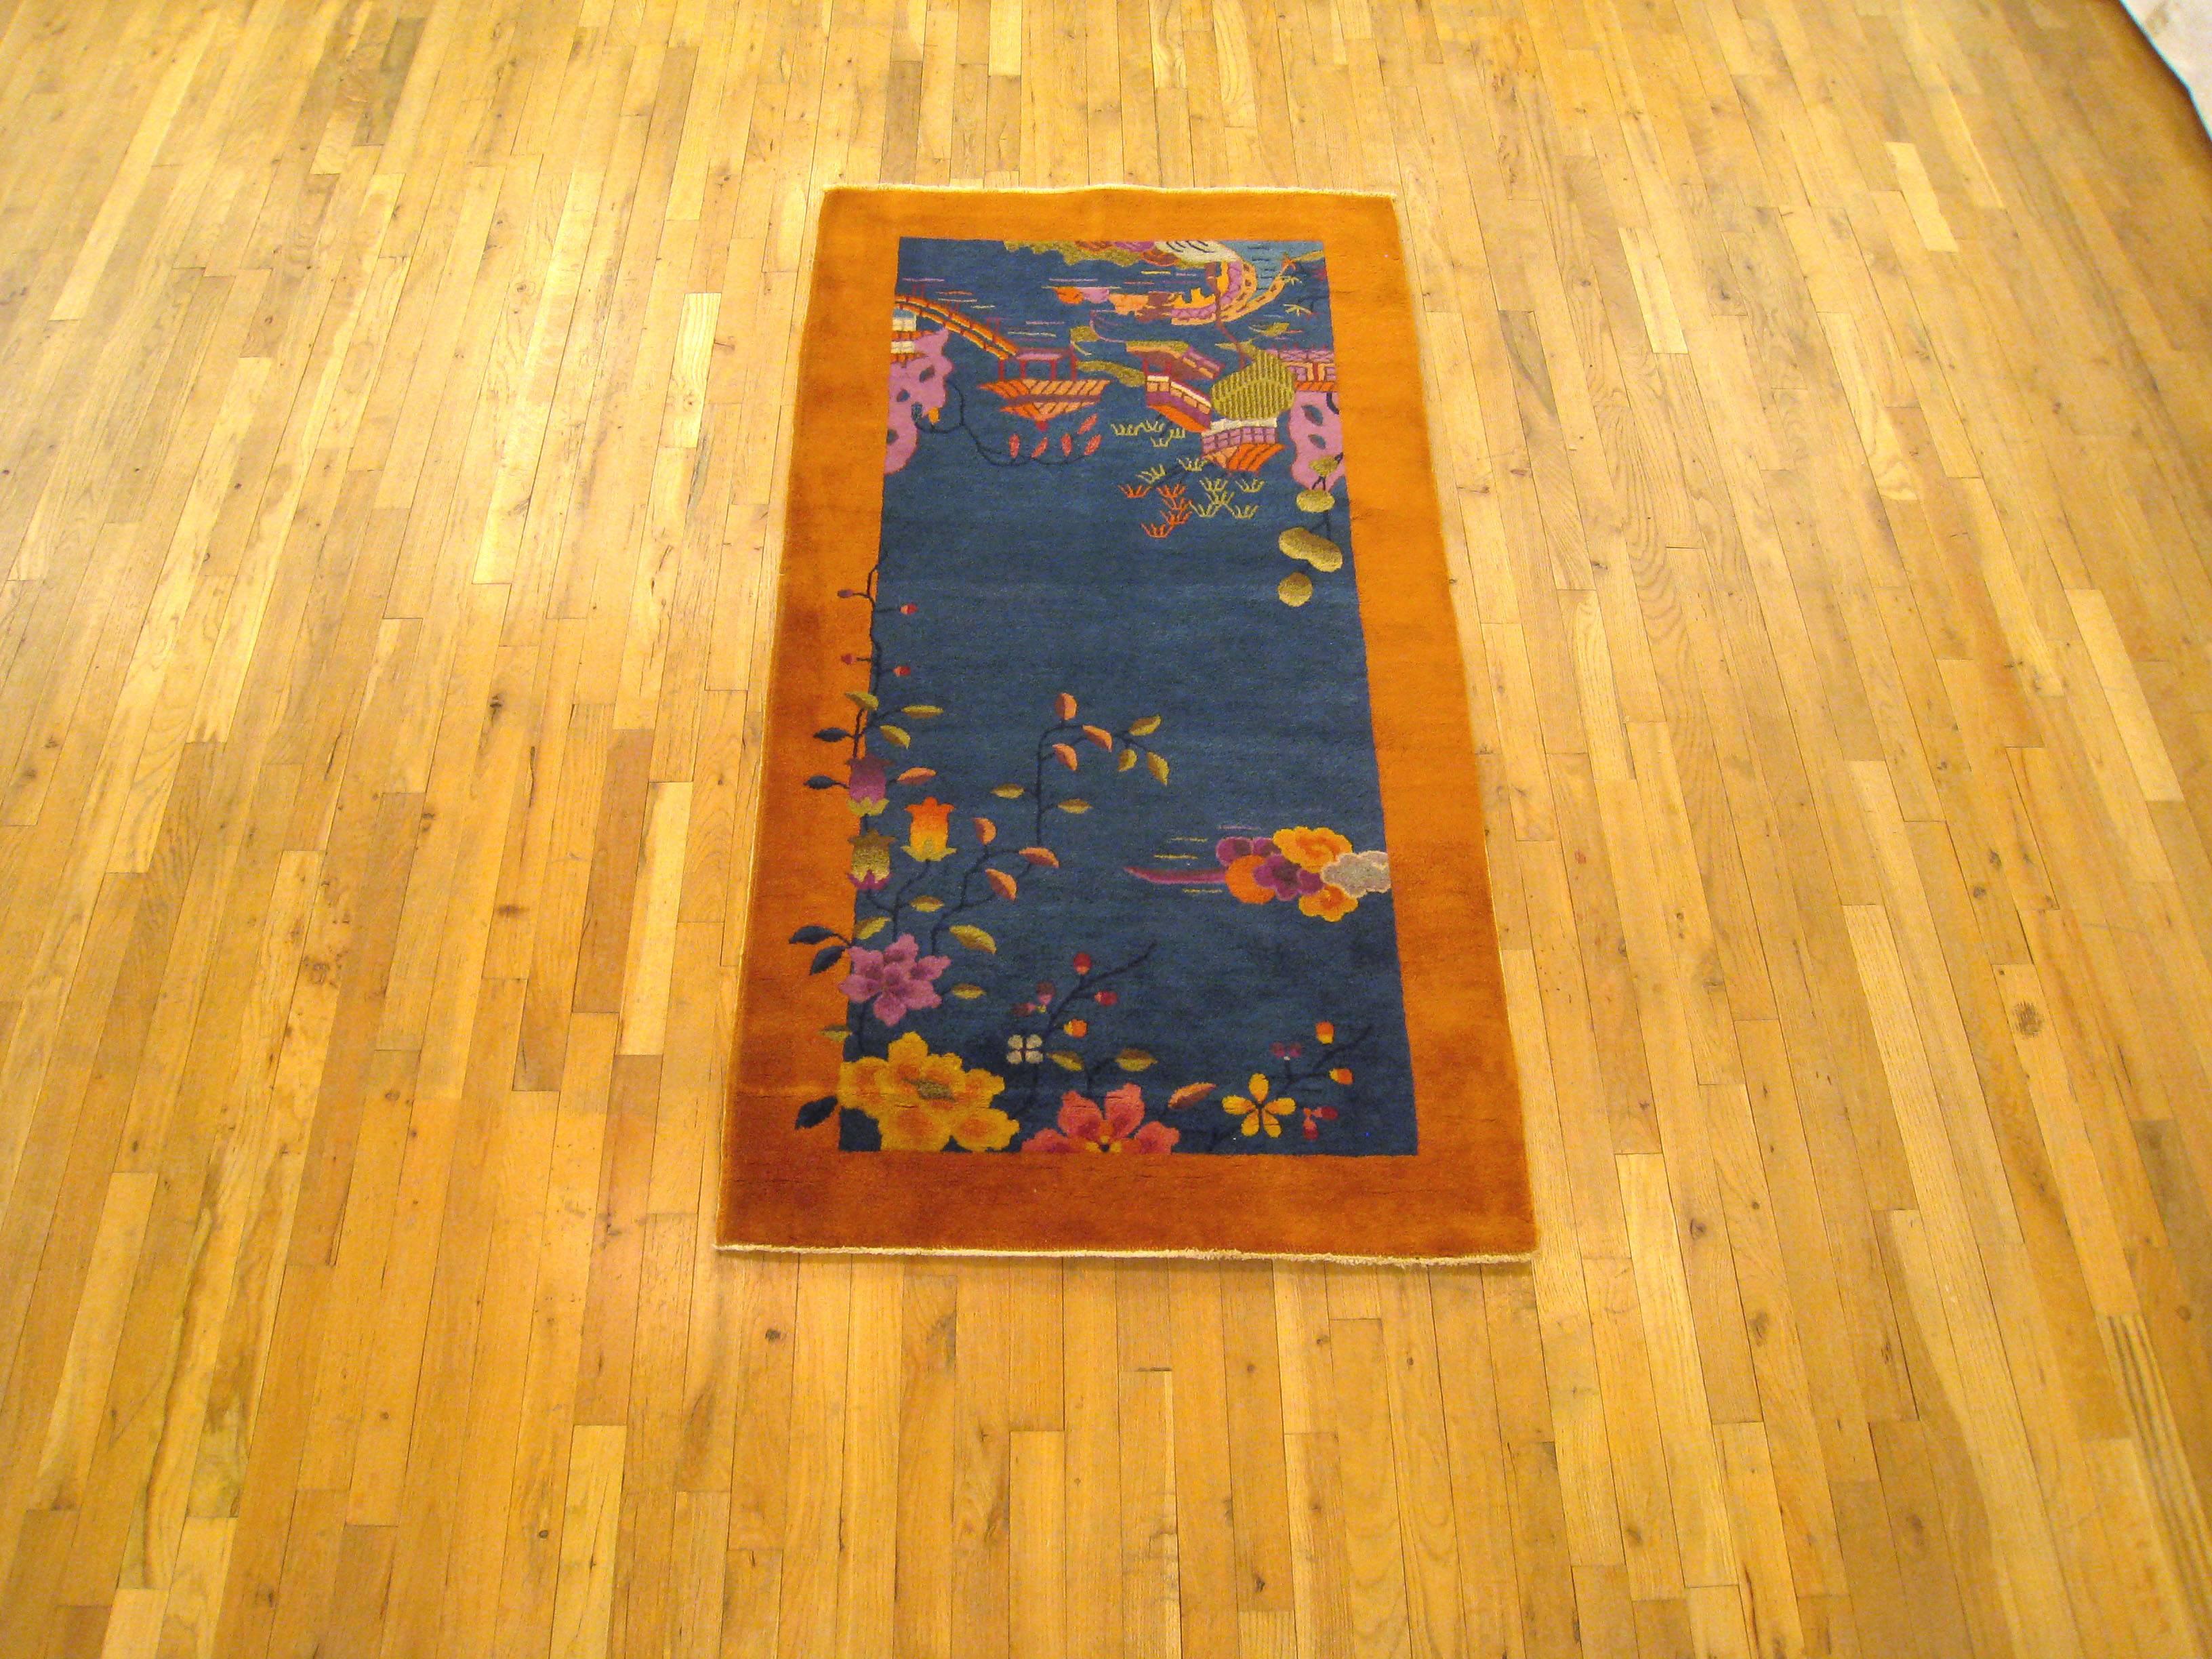 An antique Chinese Art Deco oriental rug, size 6'0 x 3'0, circa 1920. This lovely hand-knotted antique carpet features a distinctive color palette, with blues in the directional central field, and a unique gold color in the outer border. The field